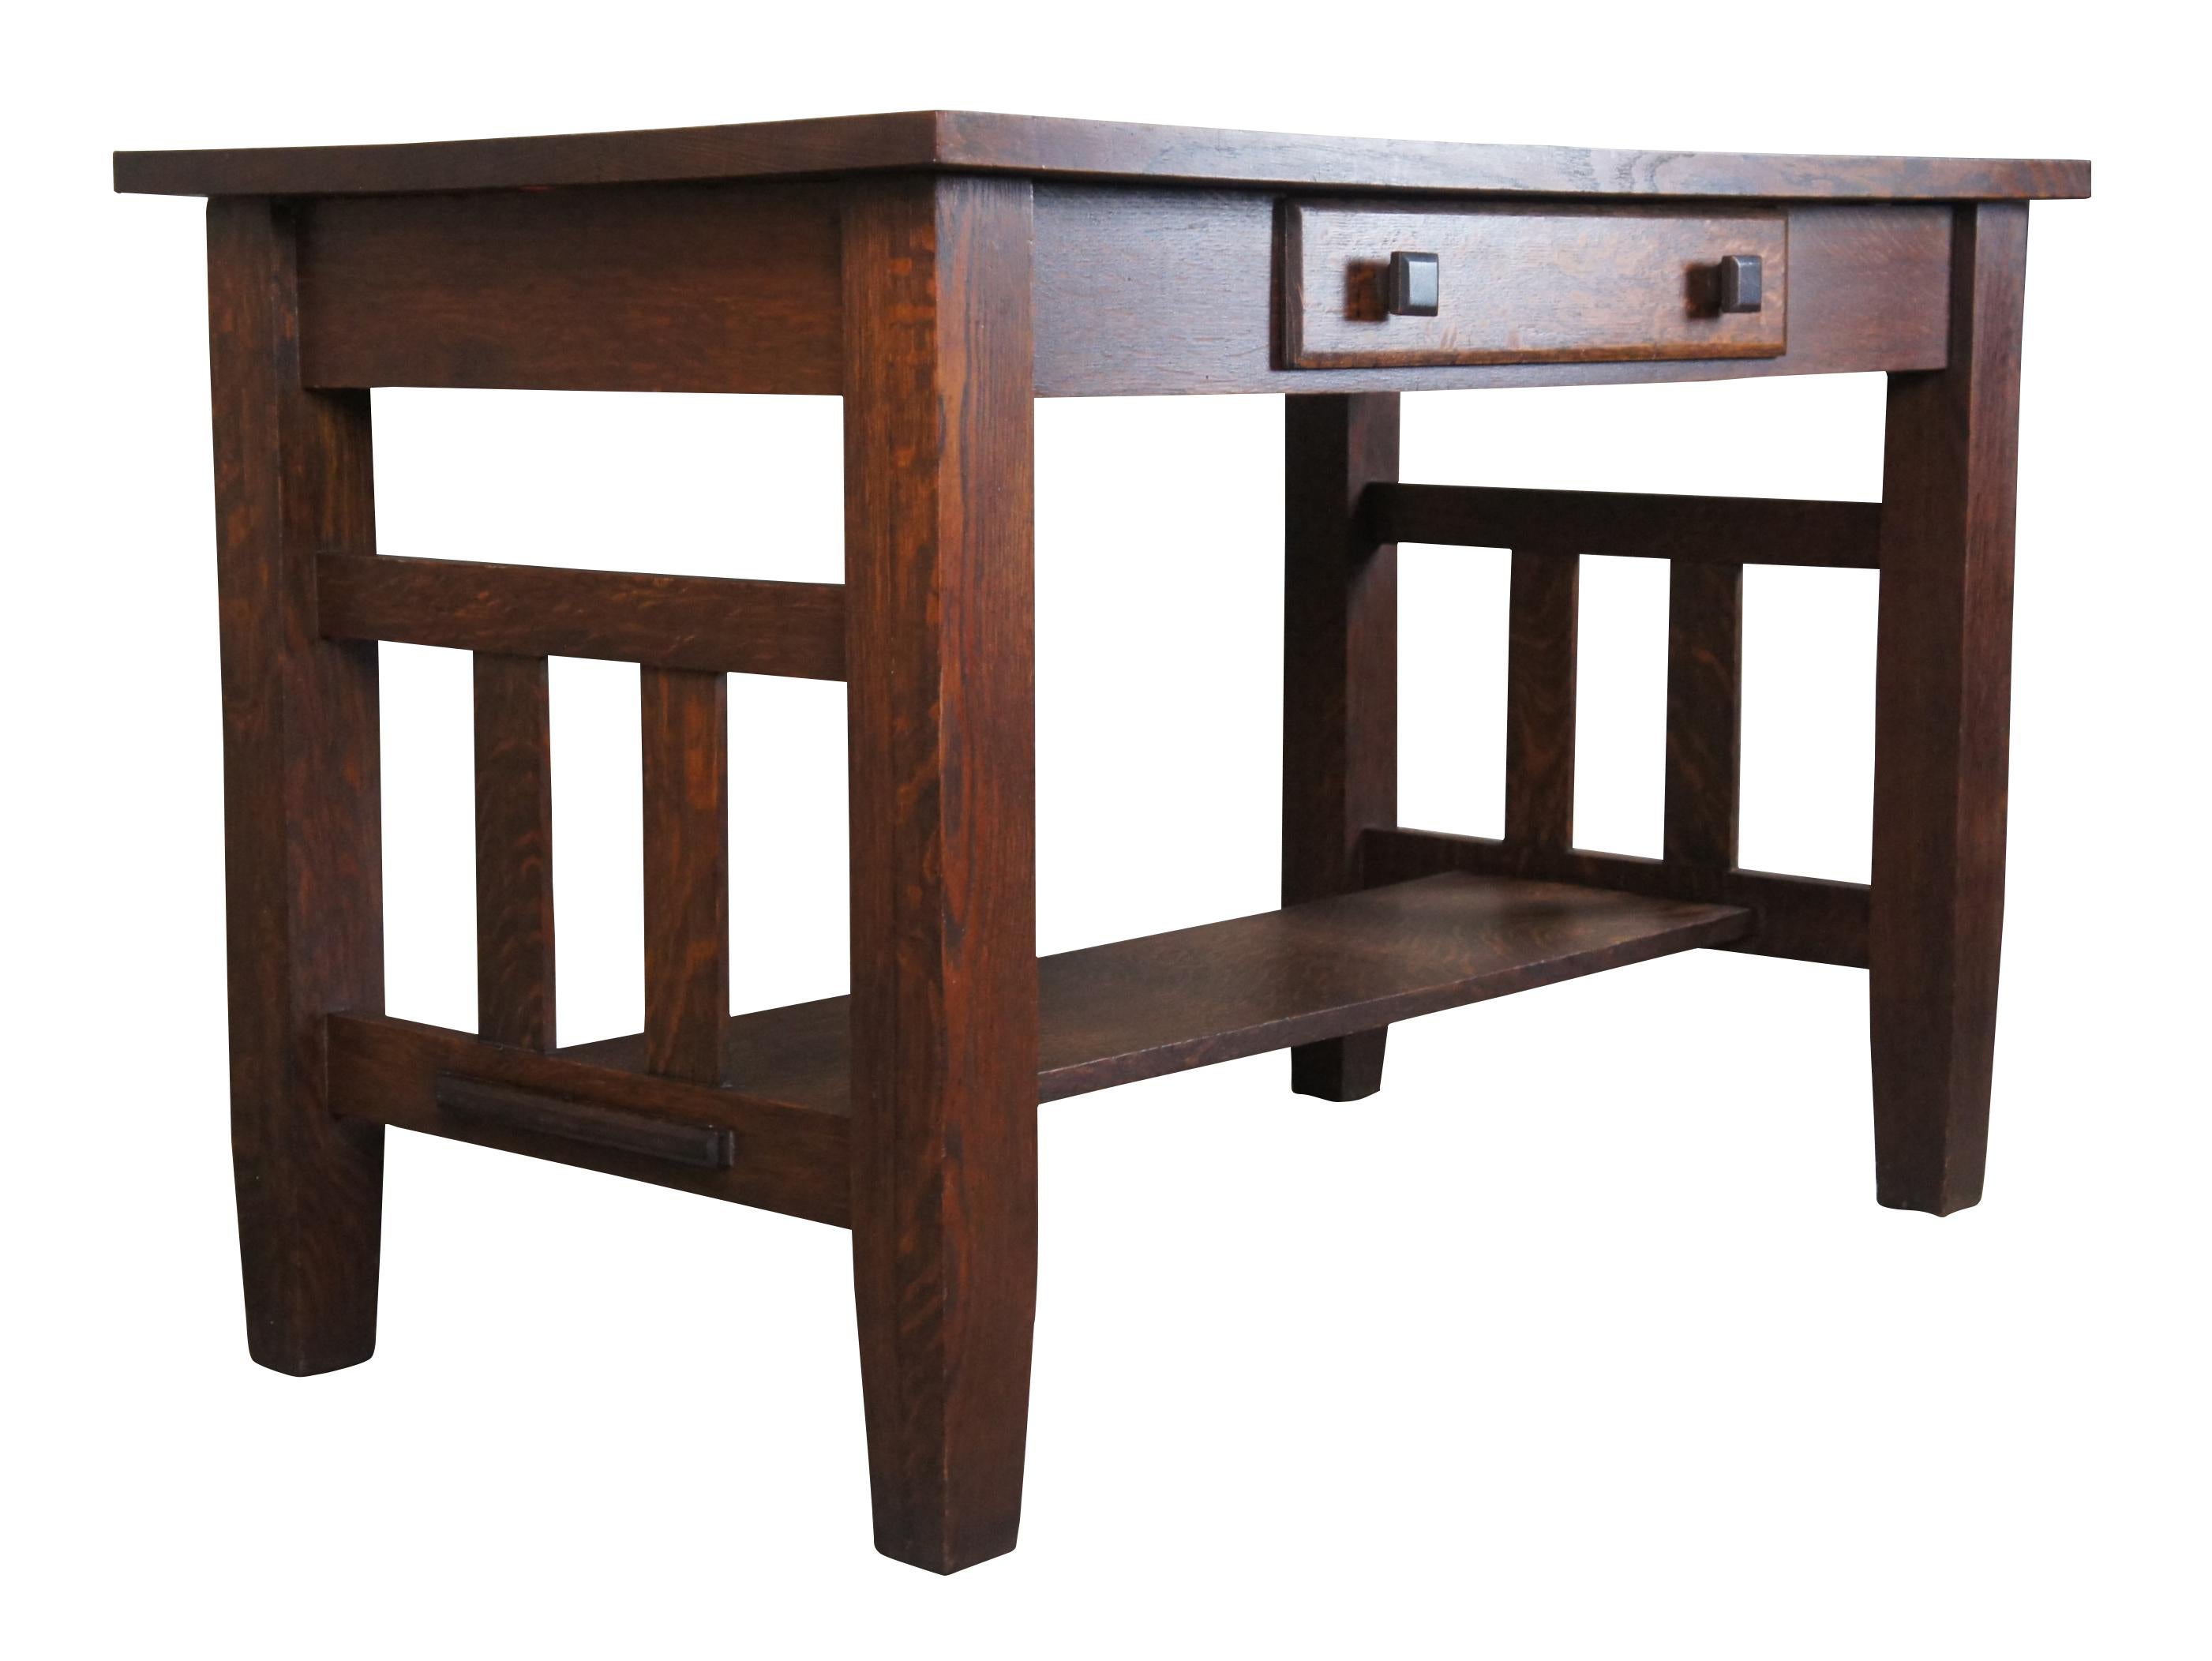 Antique handmade Mission desk made by James Dietz an Ohio craftsman, circa 1920s. A rectangular form made from quartersawn oak with classic slatted sides and lower shelf / foot rest. Includes a central drawer with square turned pulls.